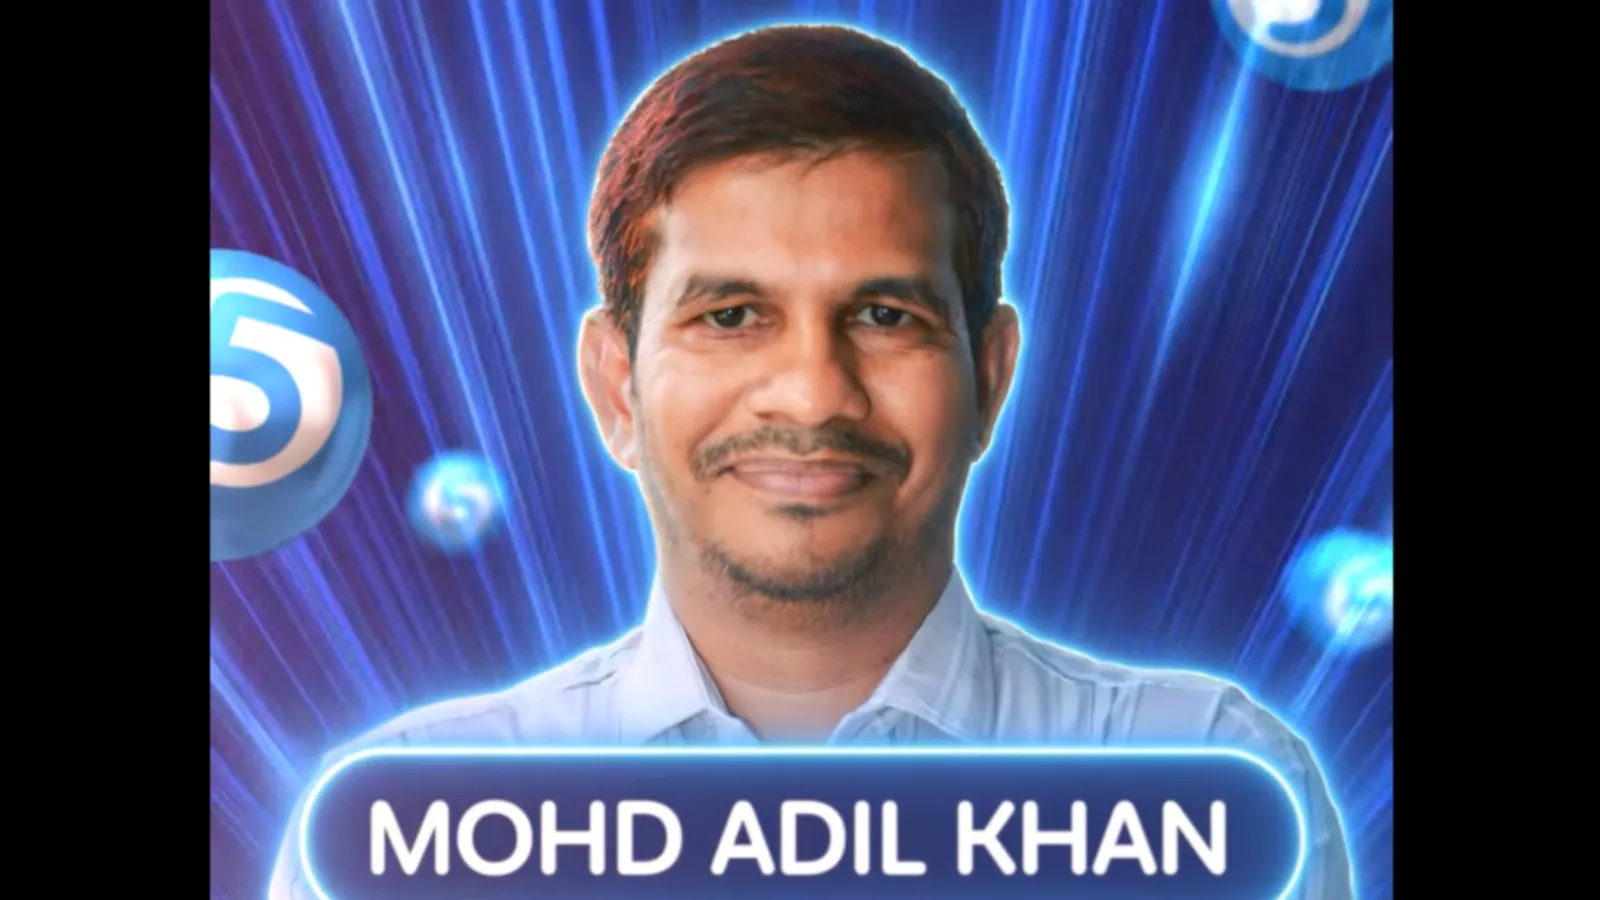 Aadil Khan wins lottery and will get 5.5 lakh rupees per month for 25 years 